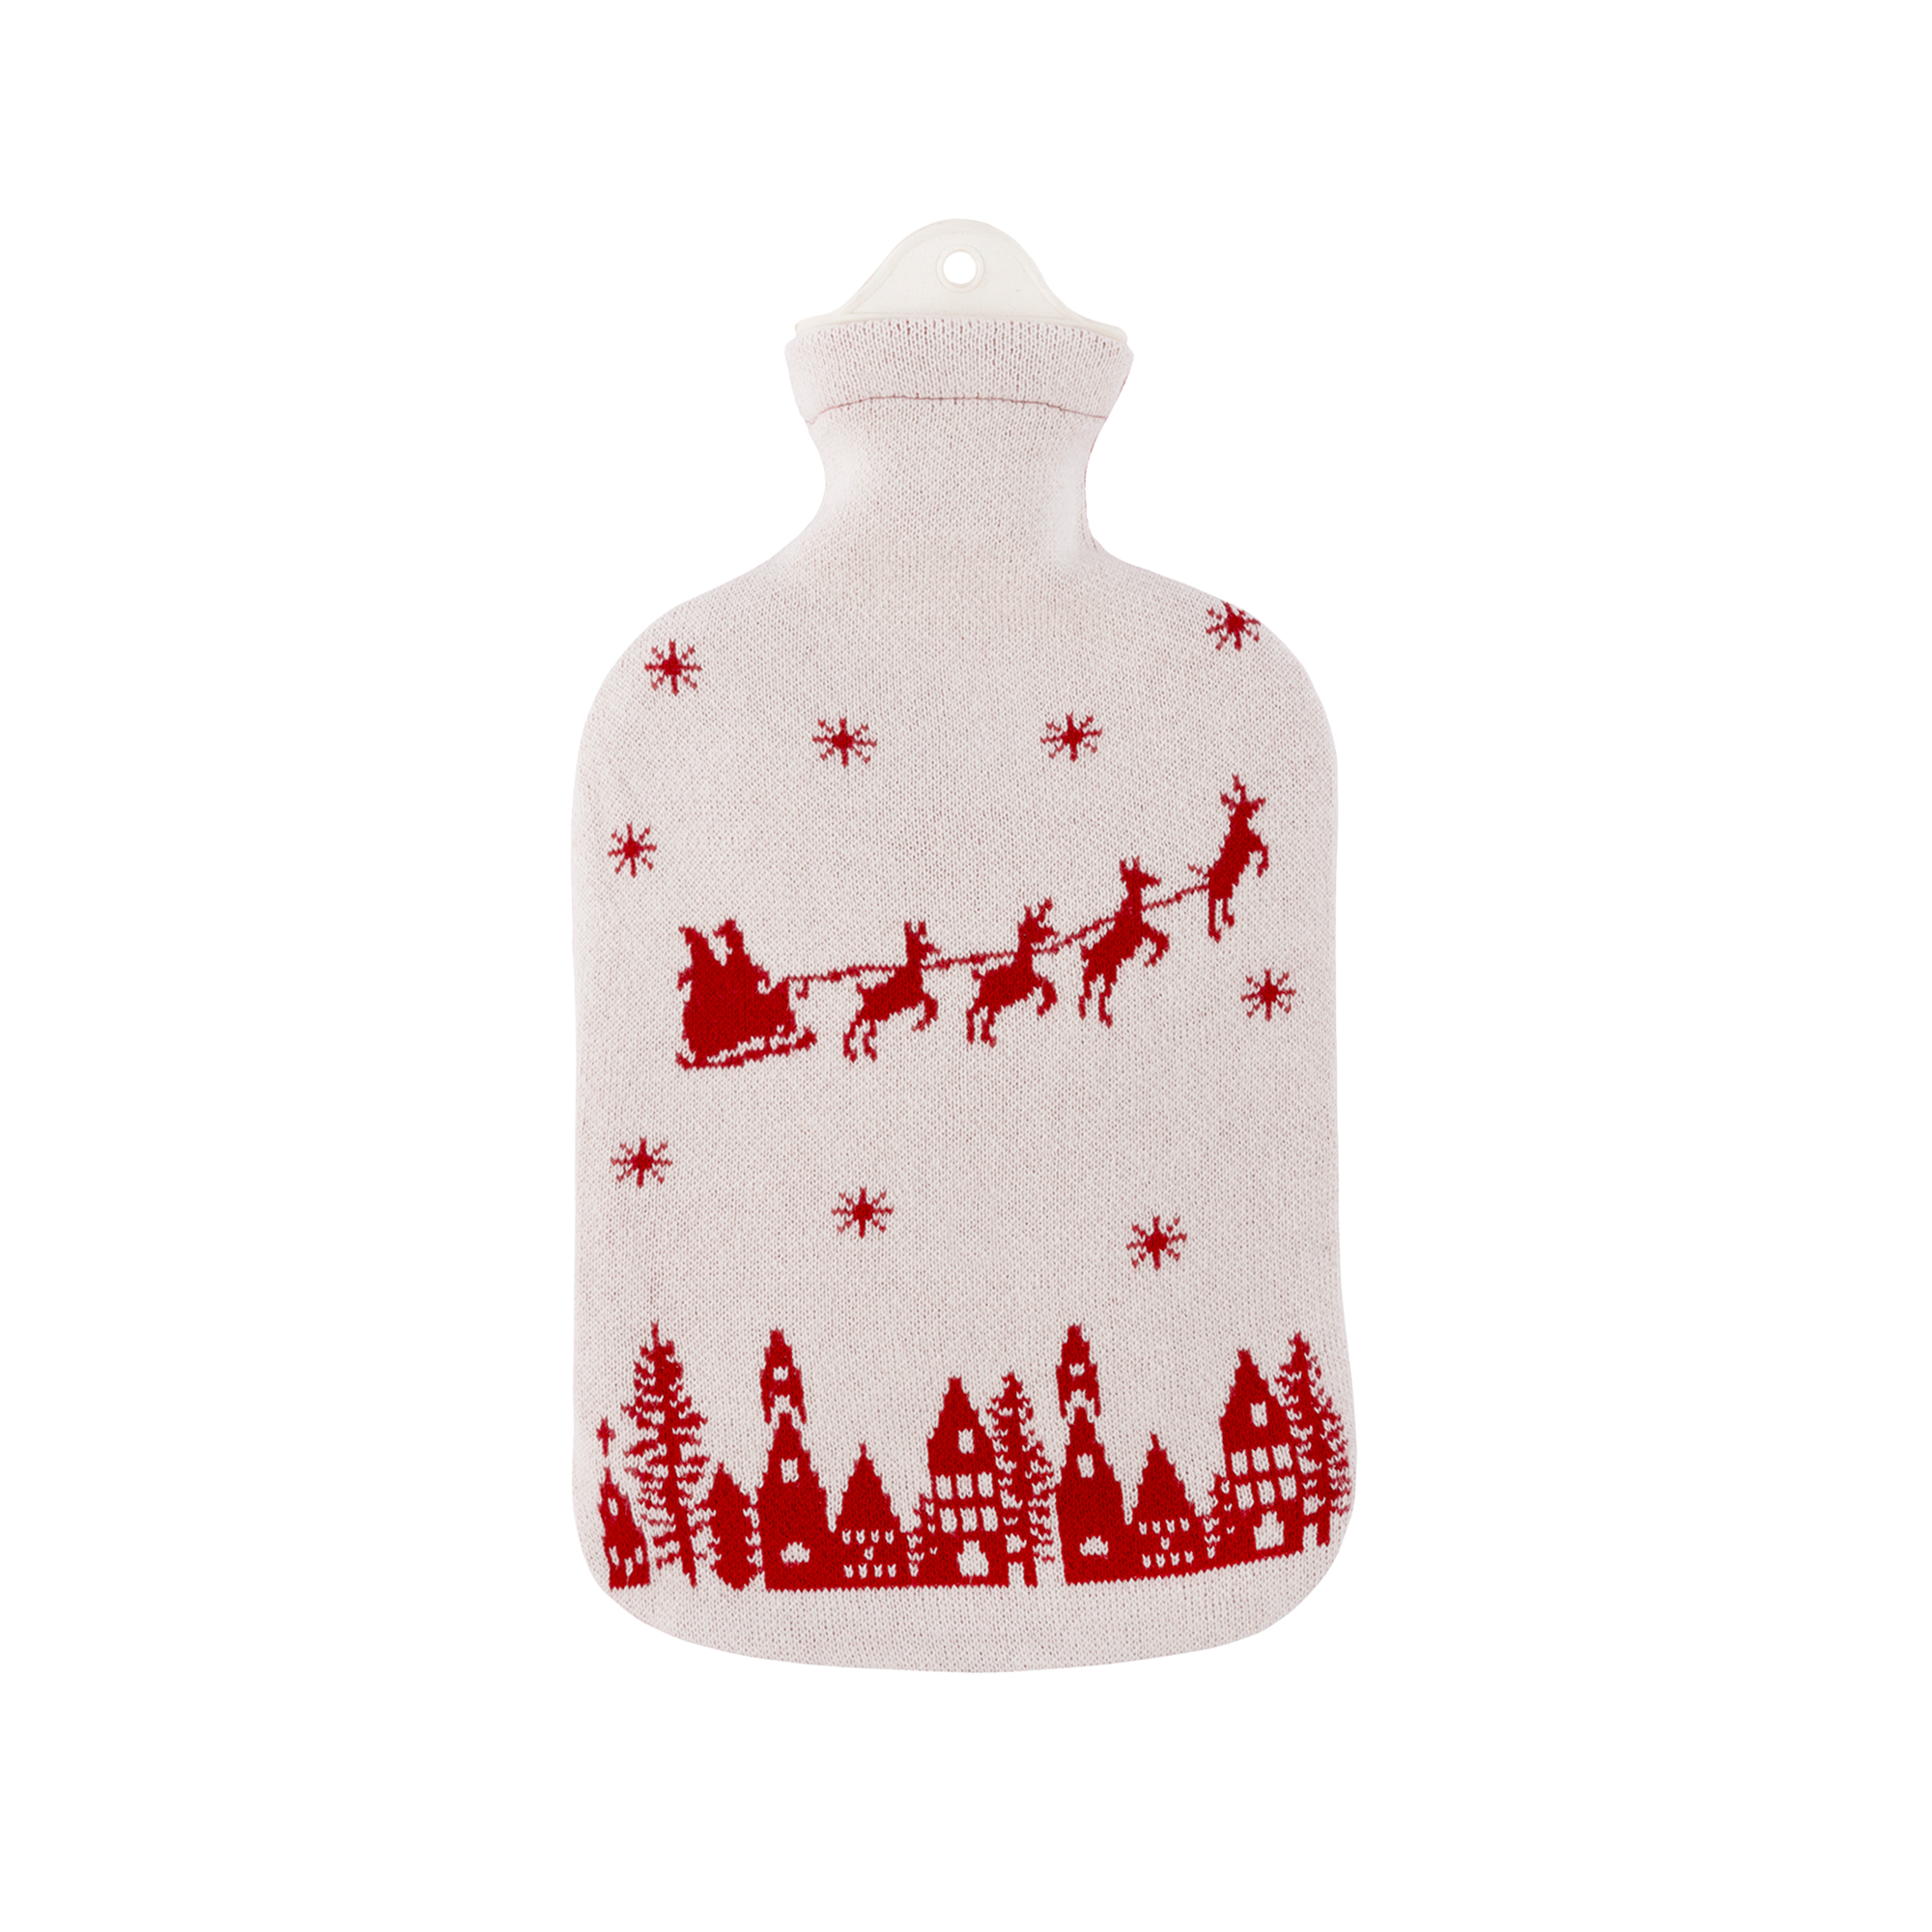 Sänger 2.0 Liter Hot Water Bottle with Cotton Knit Cover "Santa Claus"